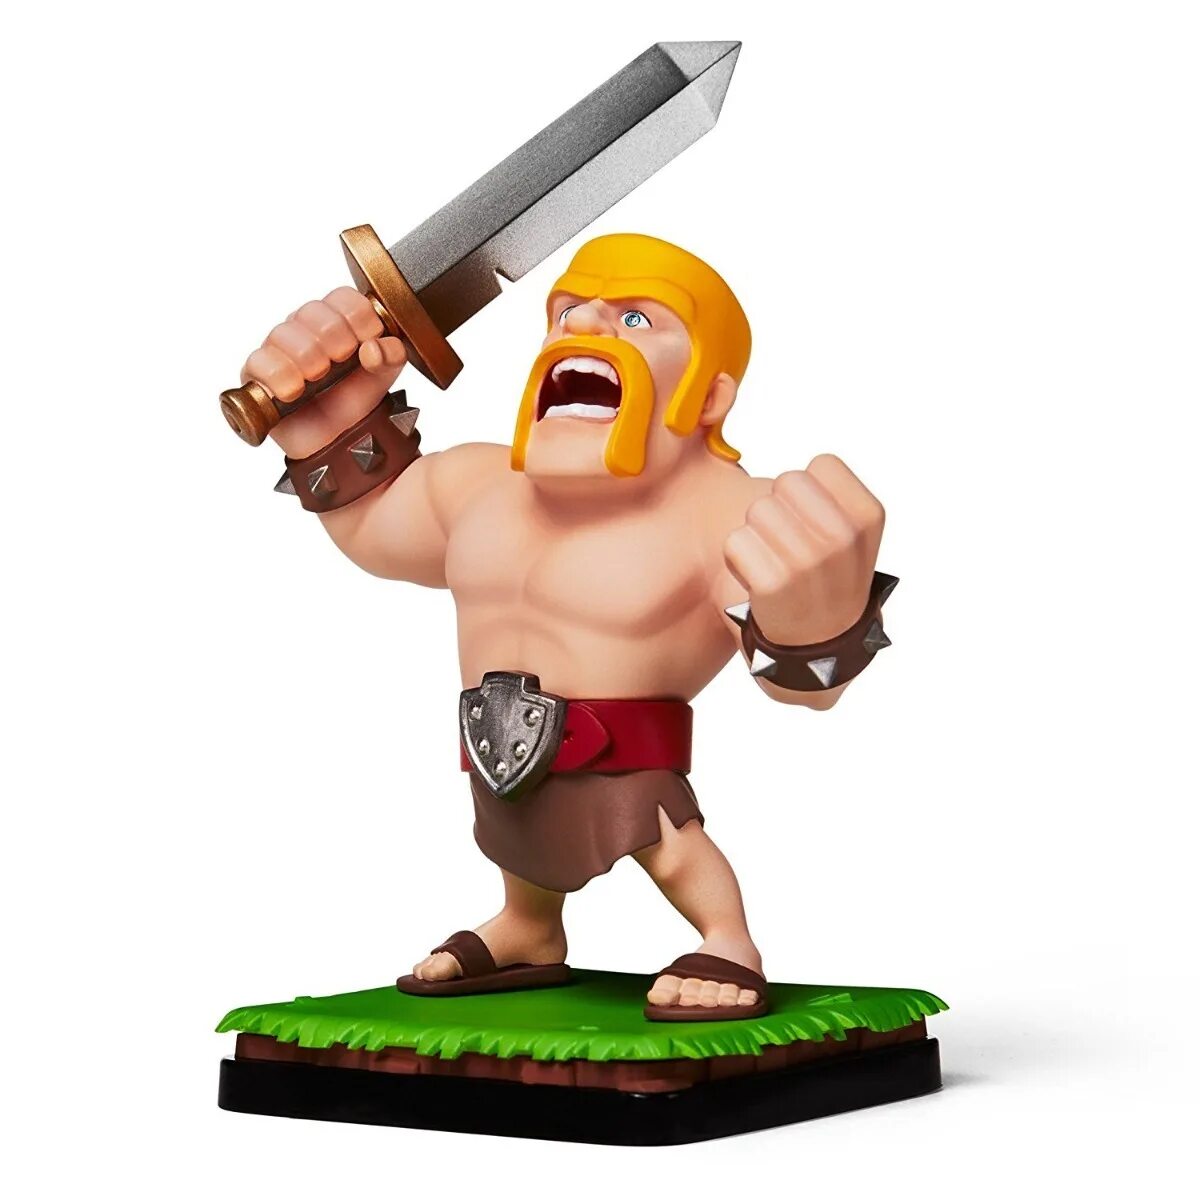 Supercell's clash of clans. Варвар клеш рояль. Варвар из клеш рояль. Варвары из клеш рояль. Барбарян Clash Royale.